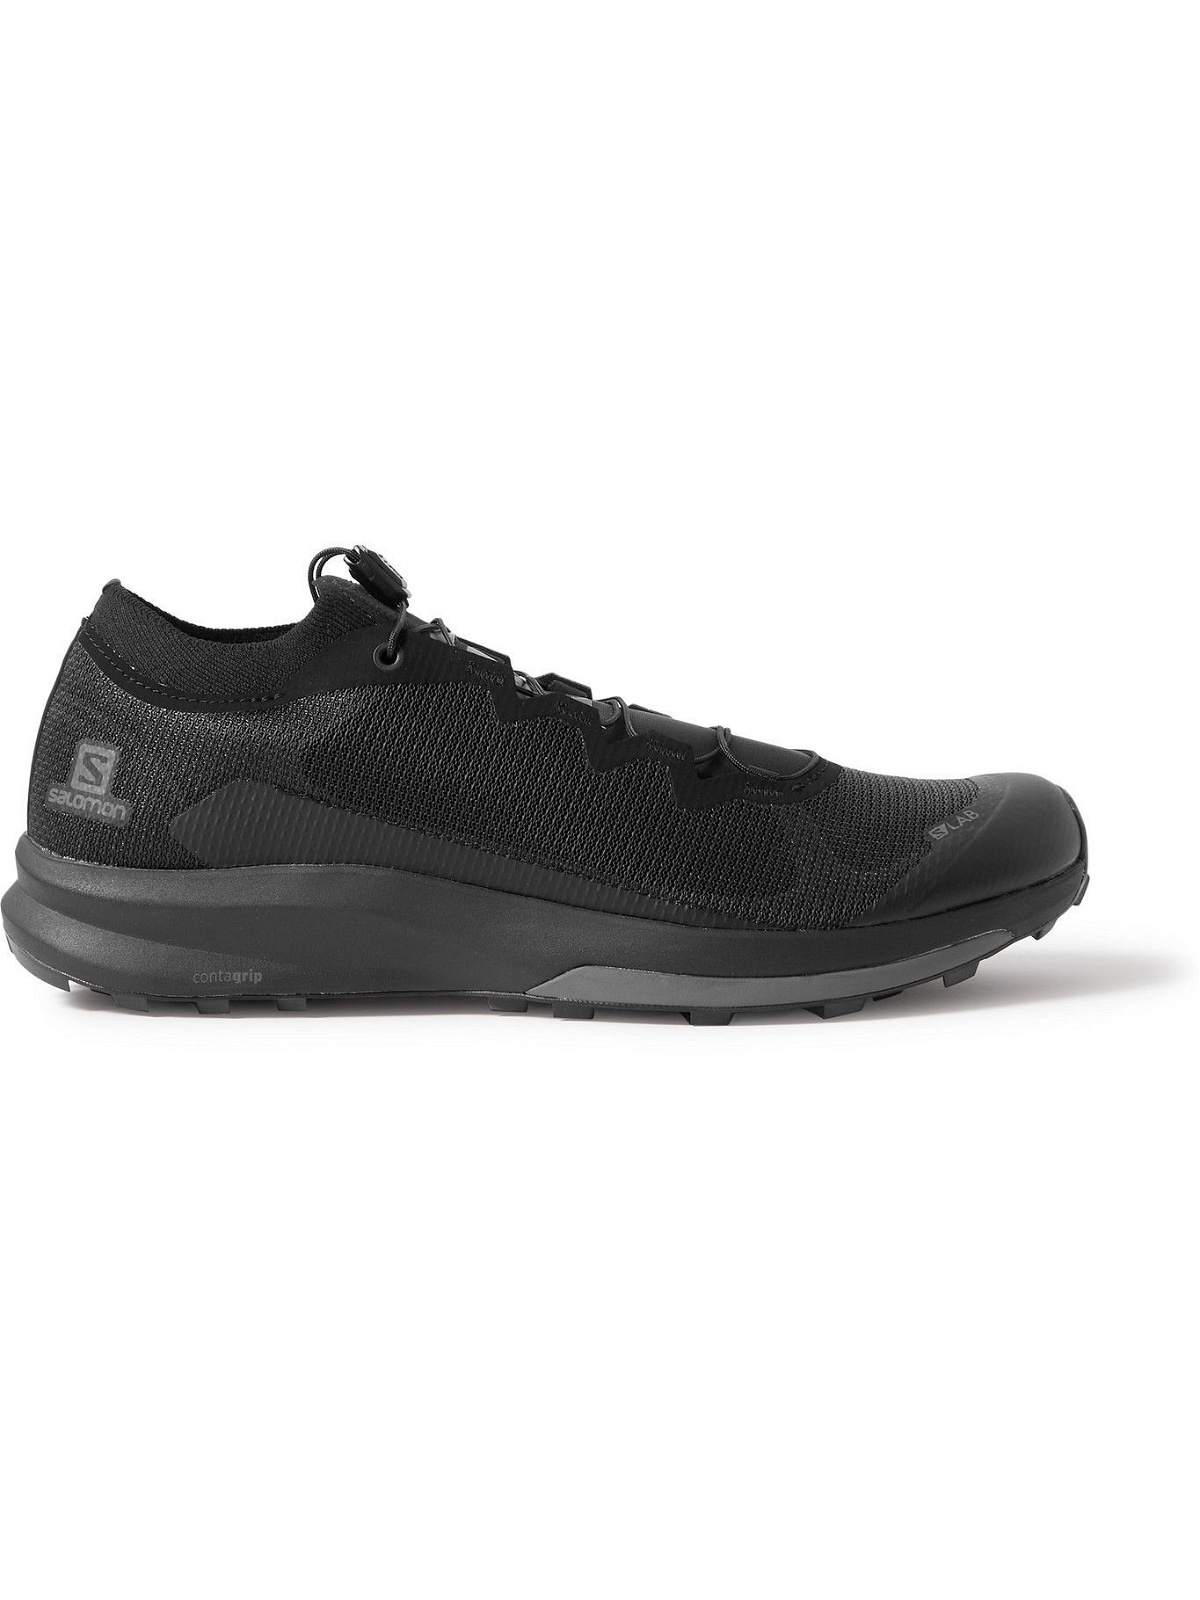 Photo: SALOMON - S/LAB ULTRA 3 Rubber-Trimmed Coated-Mesh Running Sneakers - Black